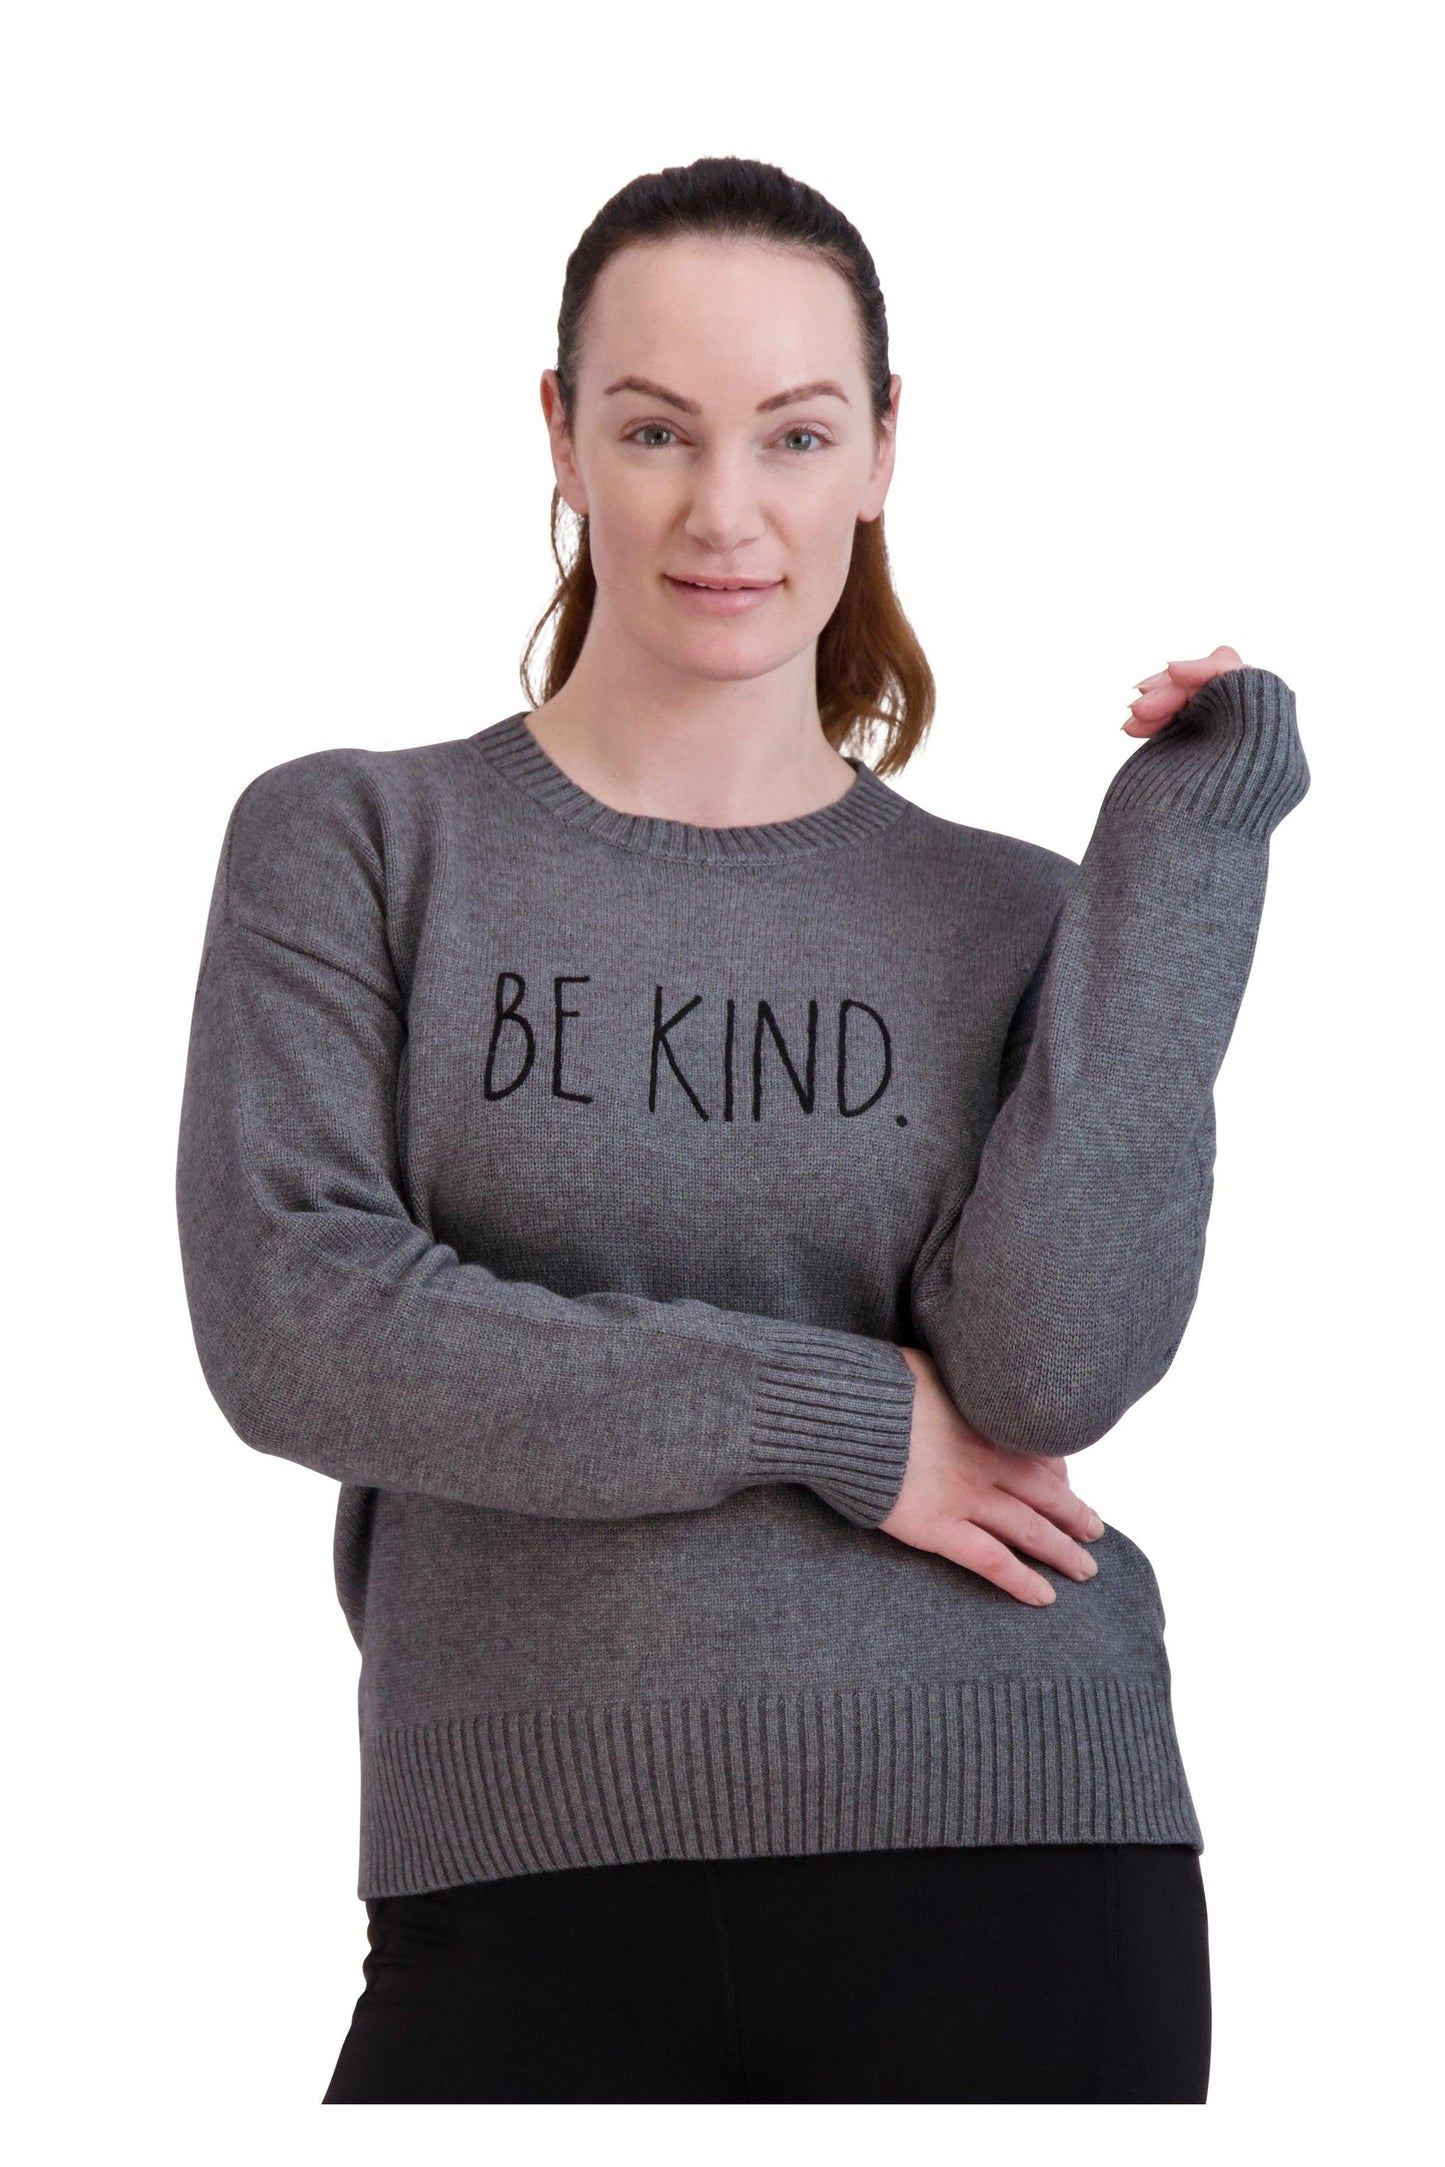 Women's Embroidered "BE KIND" Knit Gray Sweater - Rae Dunn Wear